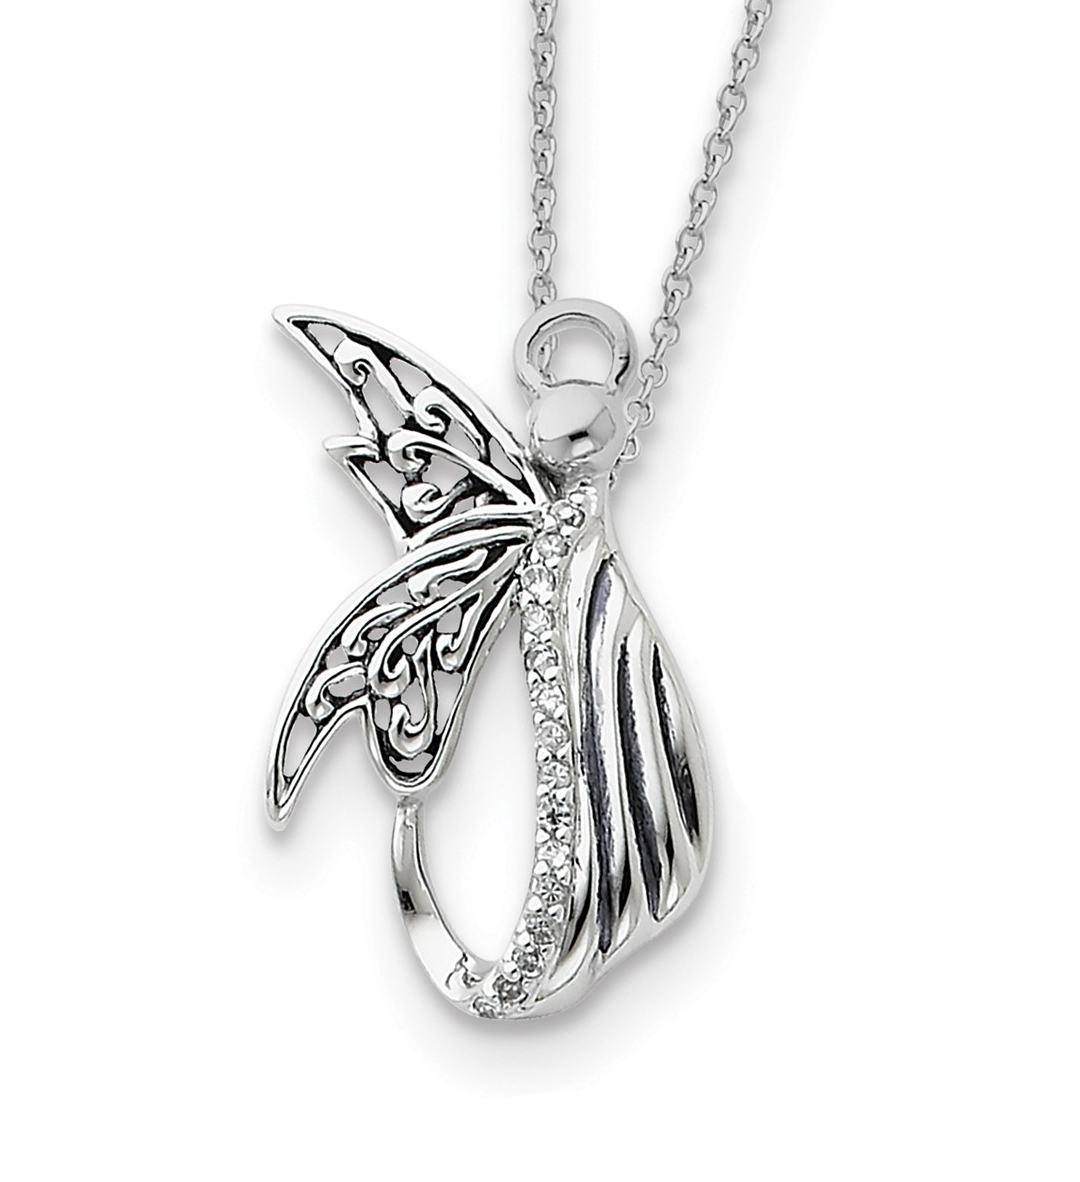 'Angel of Perseverance' CZ Pendant Necklace, Antiqued Rhodium-Plated Sterling Silver.